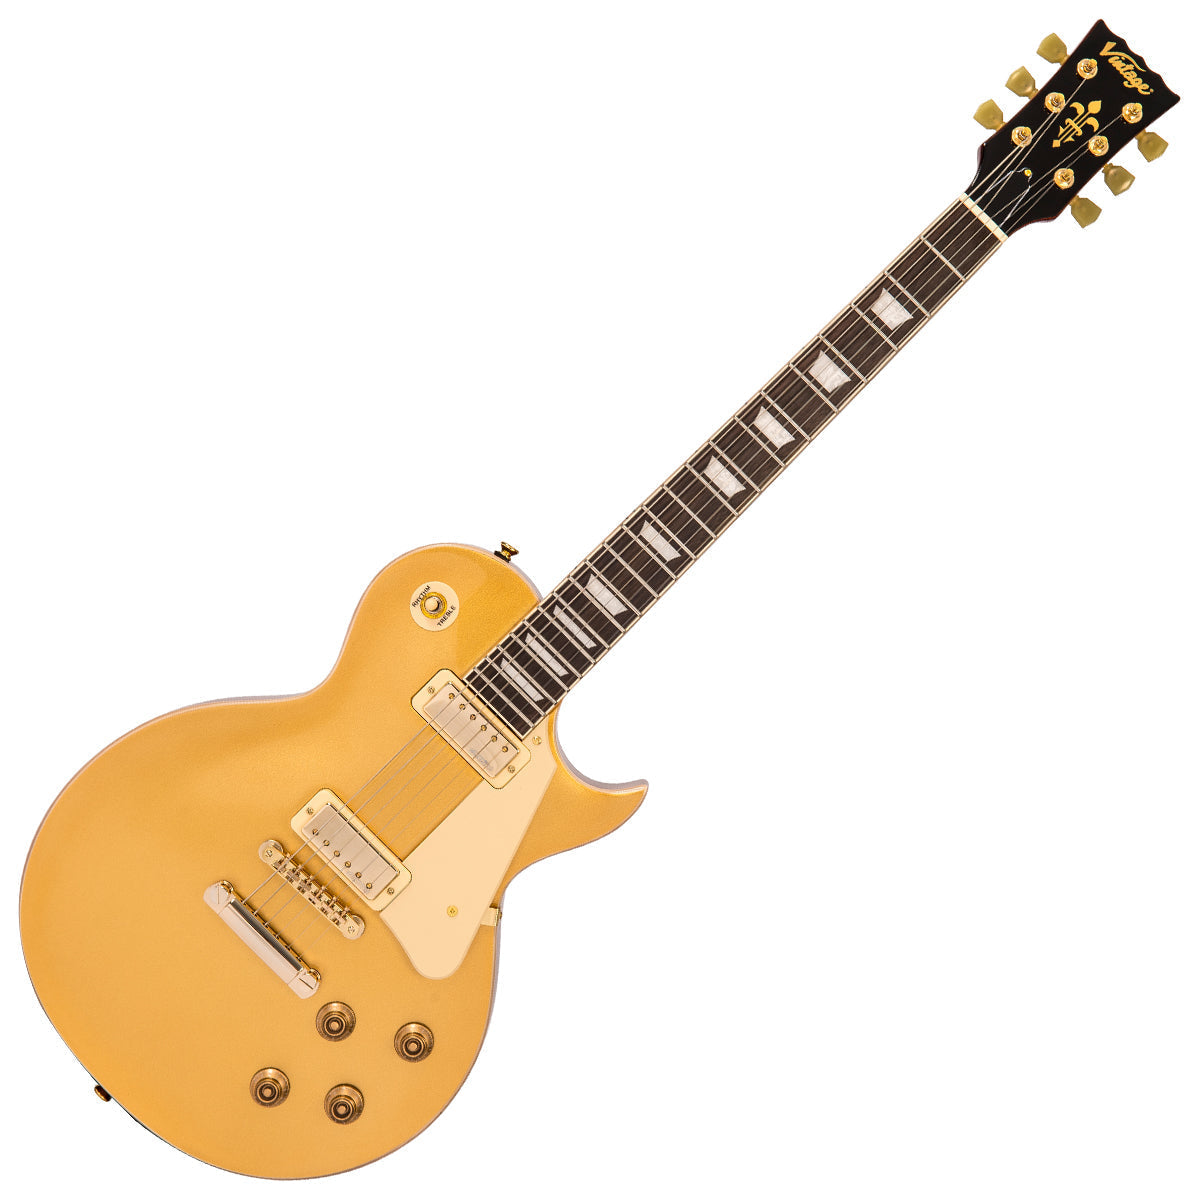 Vintage V100M Mini Double Coil ReIssued Electric Guitar ~ Gold Top, Electric Guitar for sale at Richards Guitars.